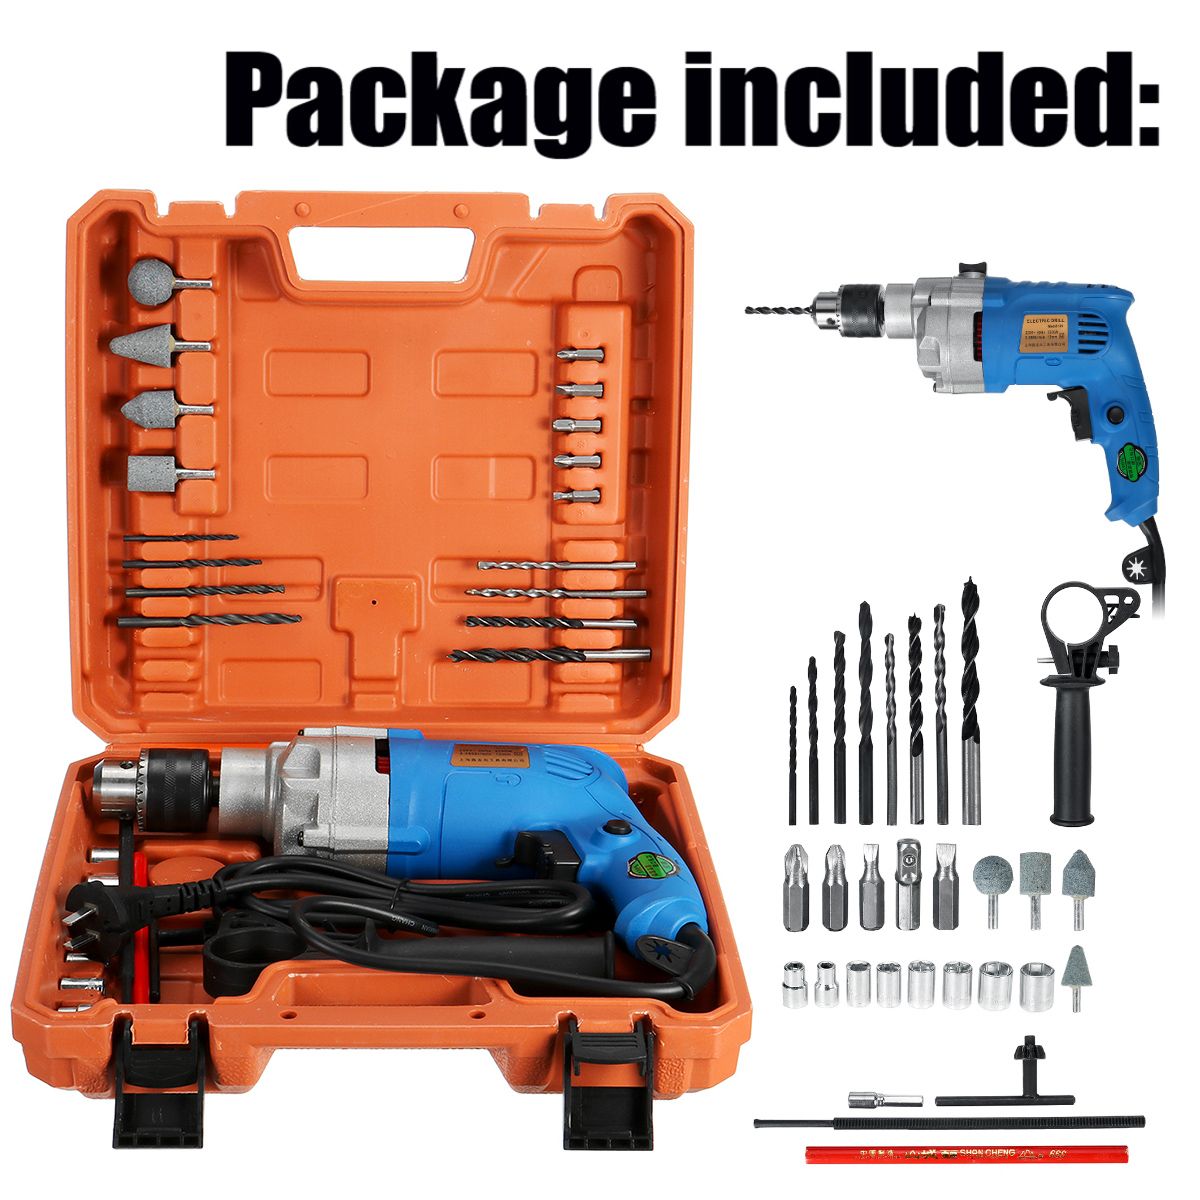 220V-2200W-Electric-Impact-Drill-Kit-Waterproof-Power-Drill-Household-13mm-Chuck-28Pcs-1764498